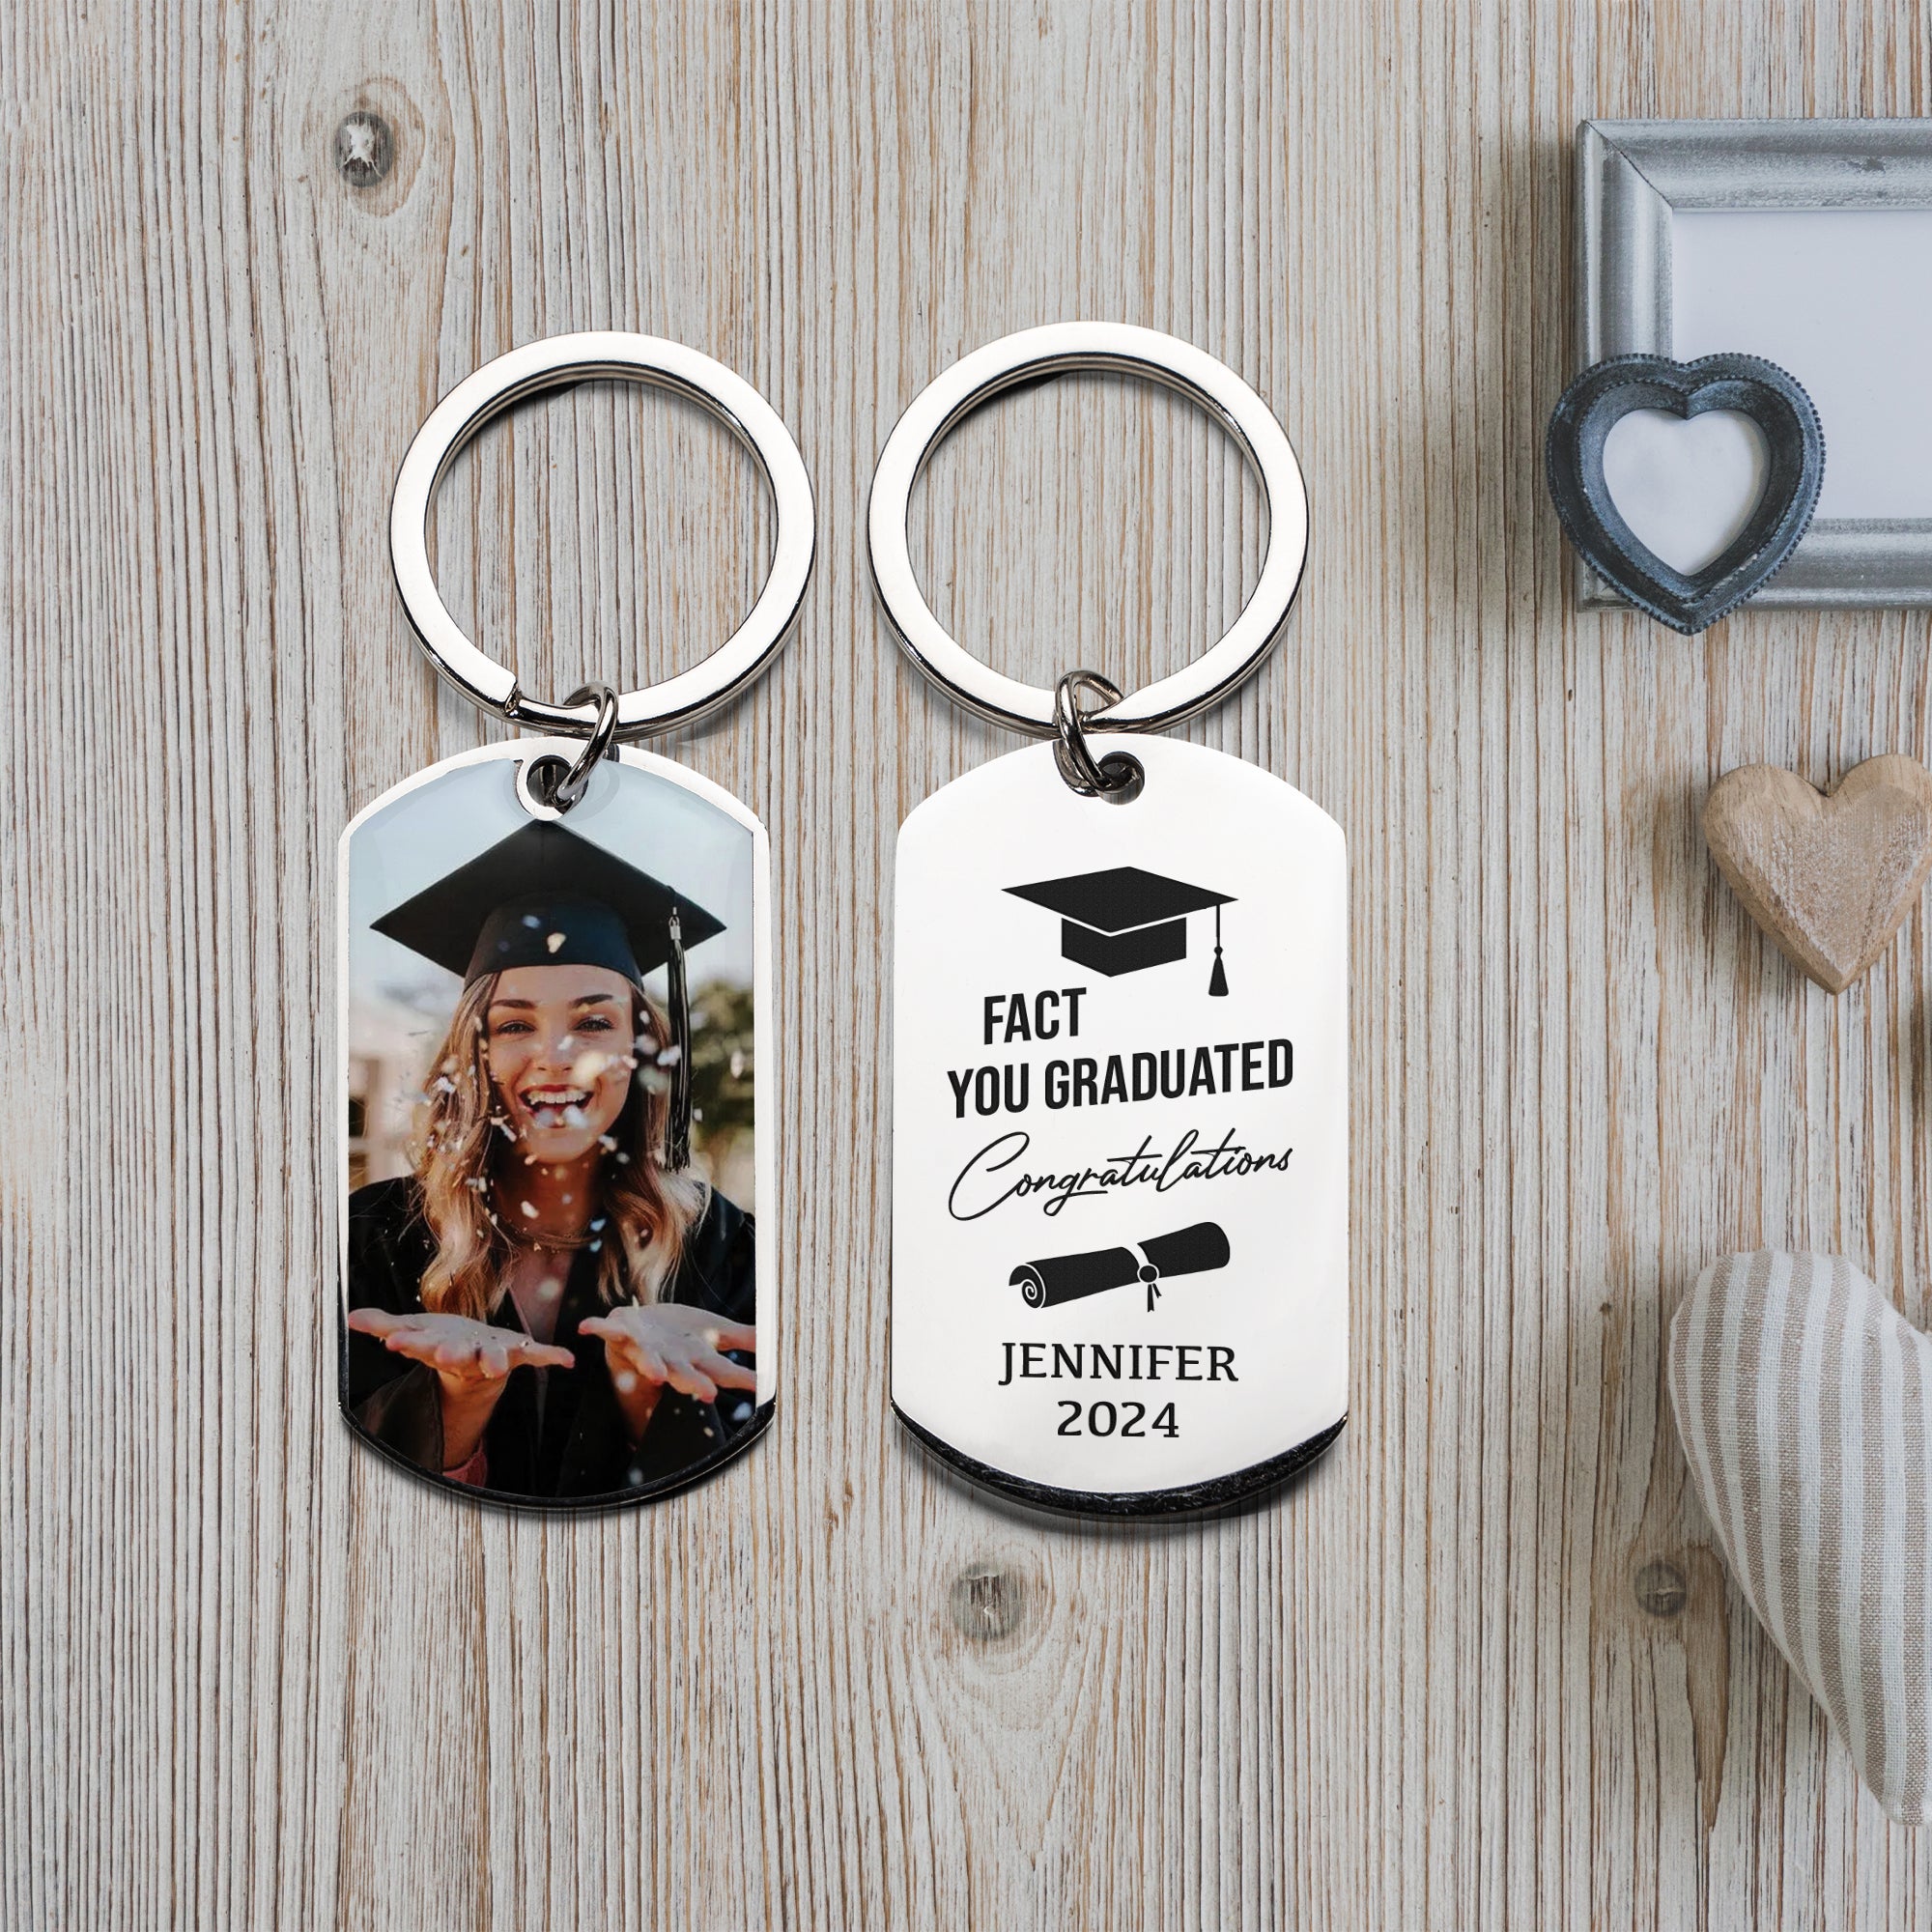 Fact You Graduated Congratulations , Personalized Photo And Text Metal Keychain, Graduation Gift